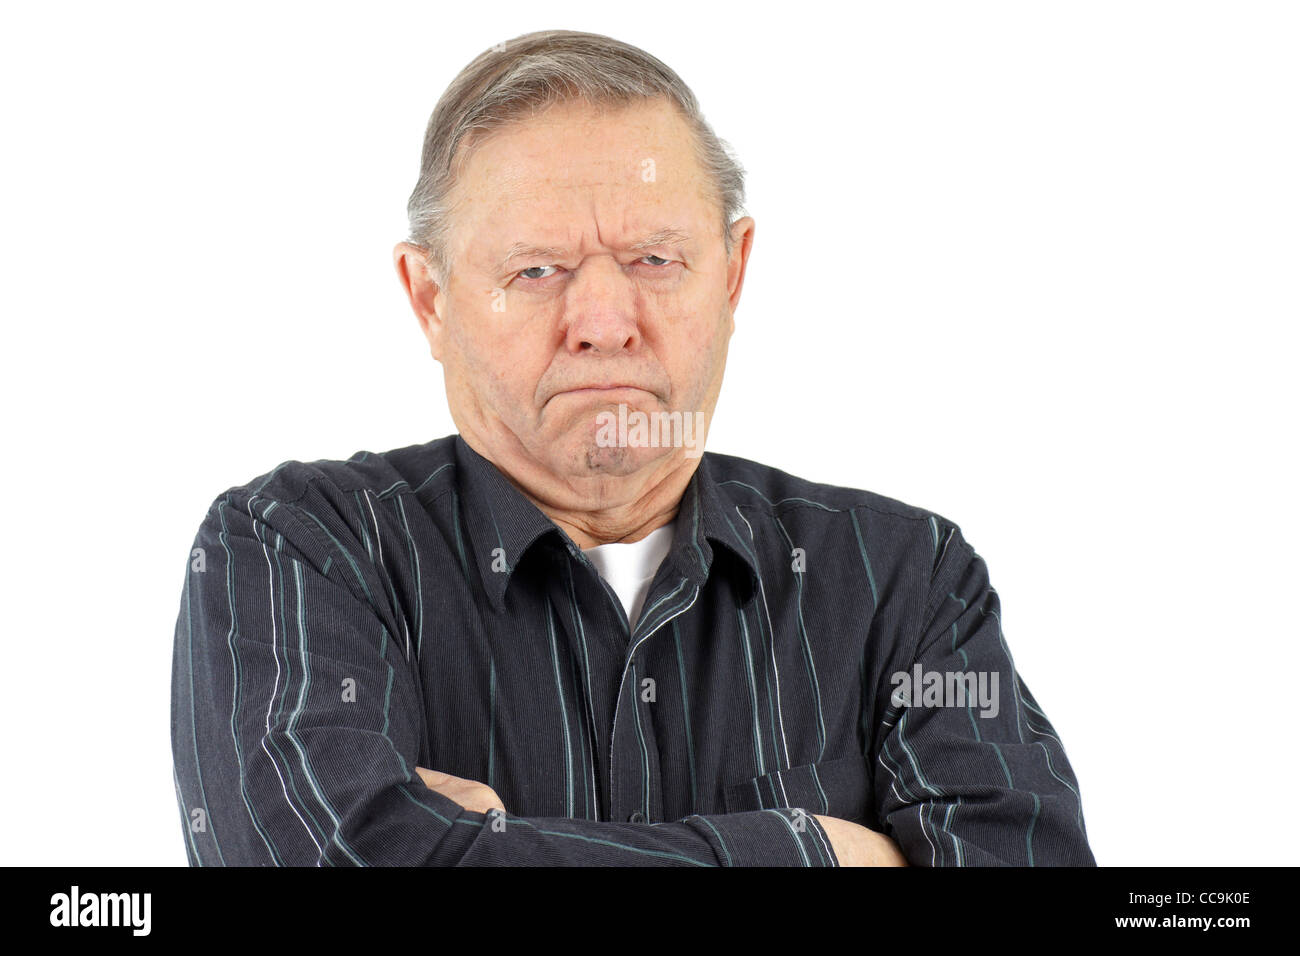 Senior man with arms crossed looking very grumpy, unhappy or mad. Stock Photo